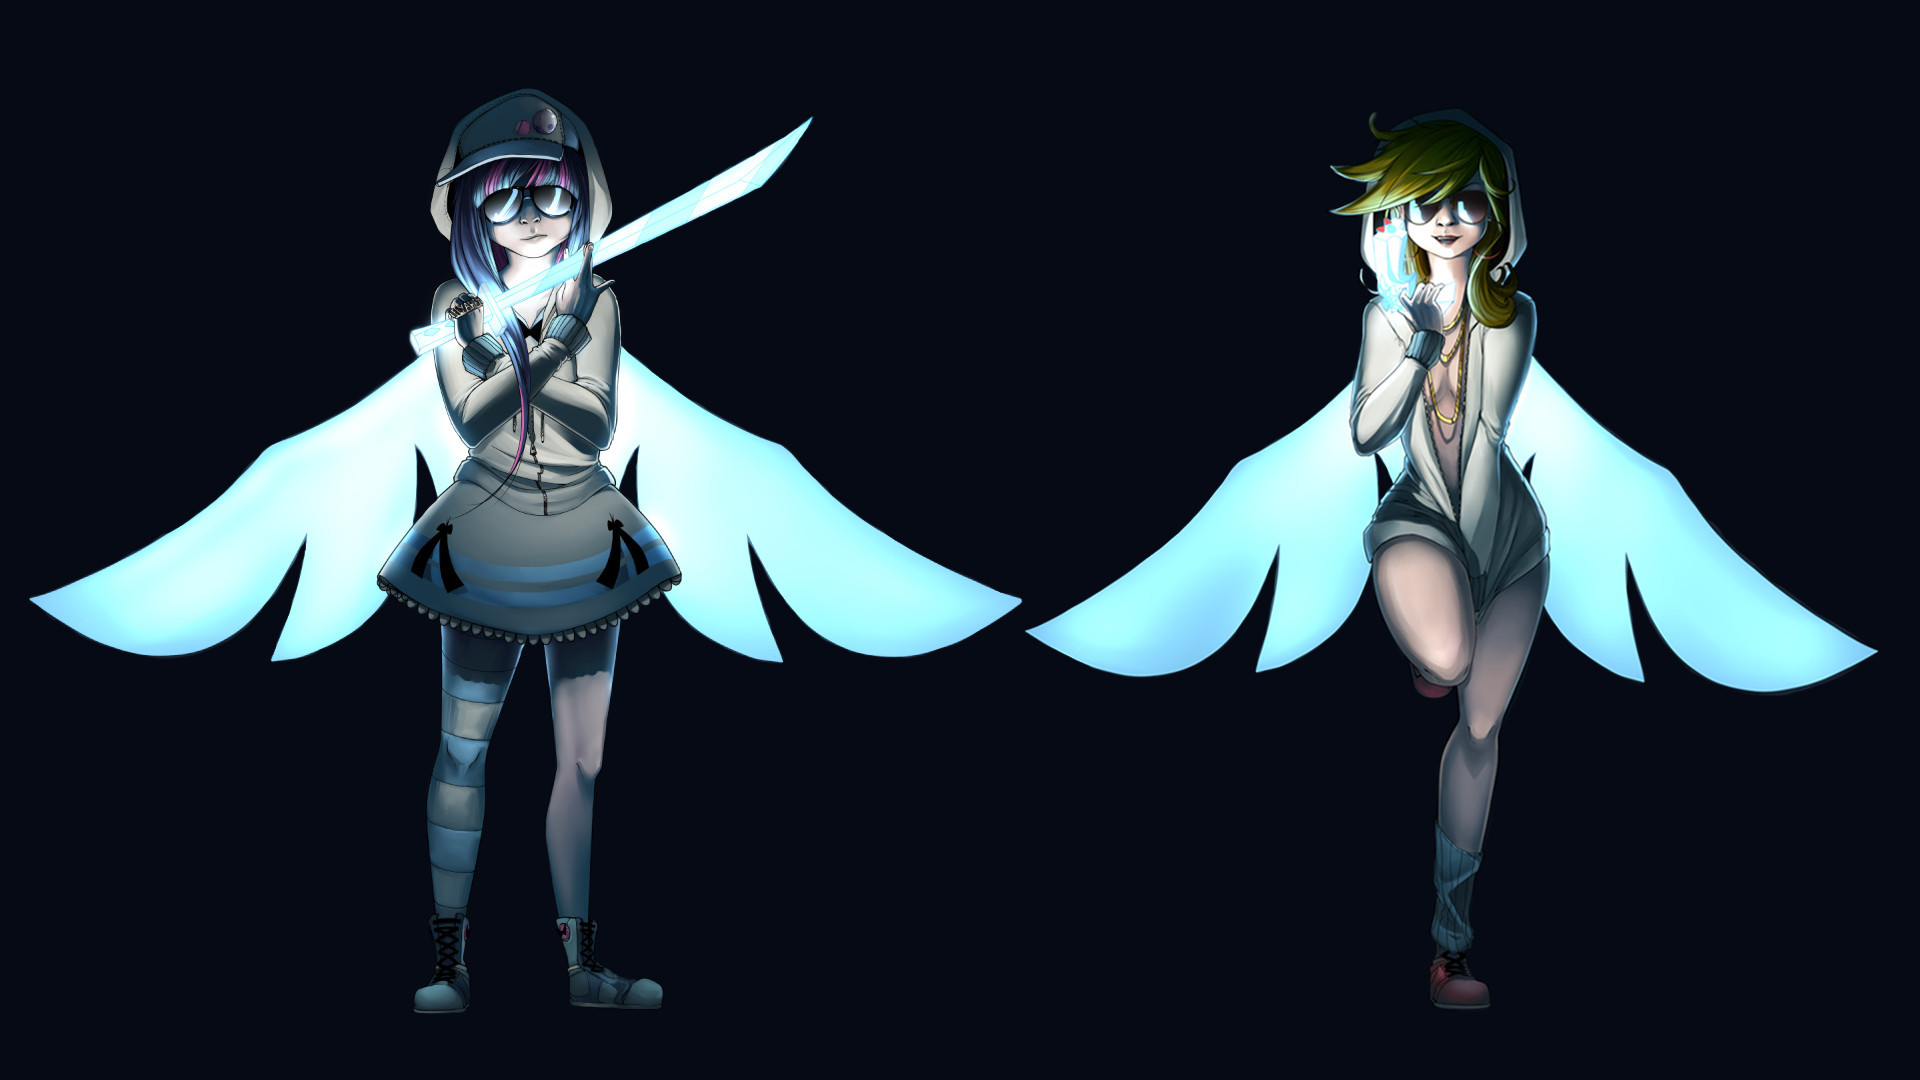 1920x1080 Coders Wallpaper Abyss Anime Panty Stocking With Garterbelt 312576 